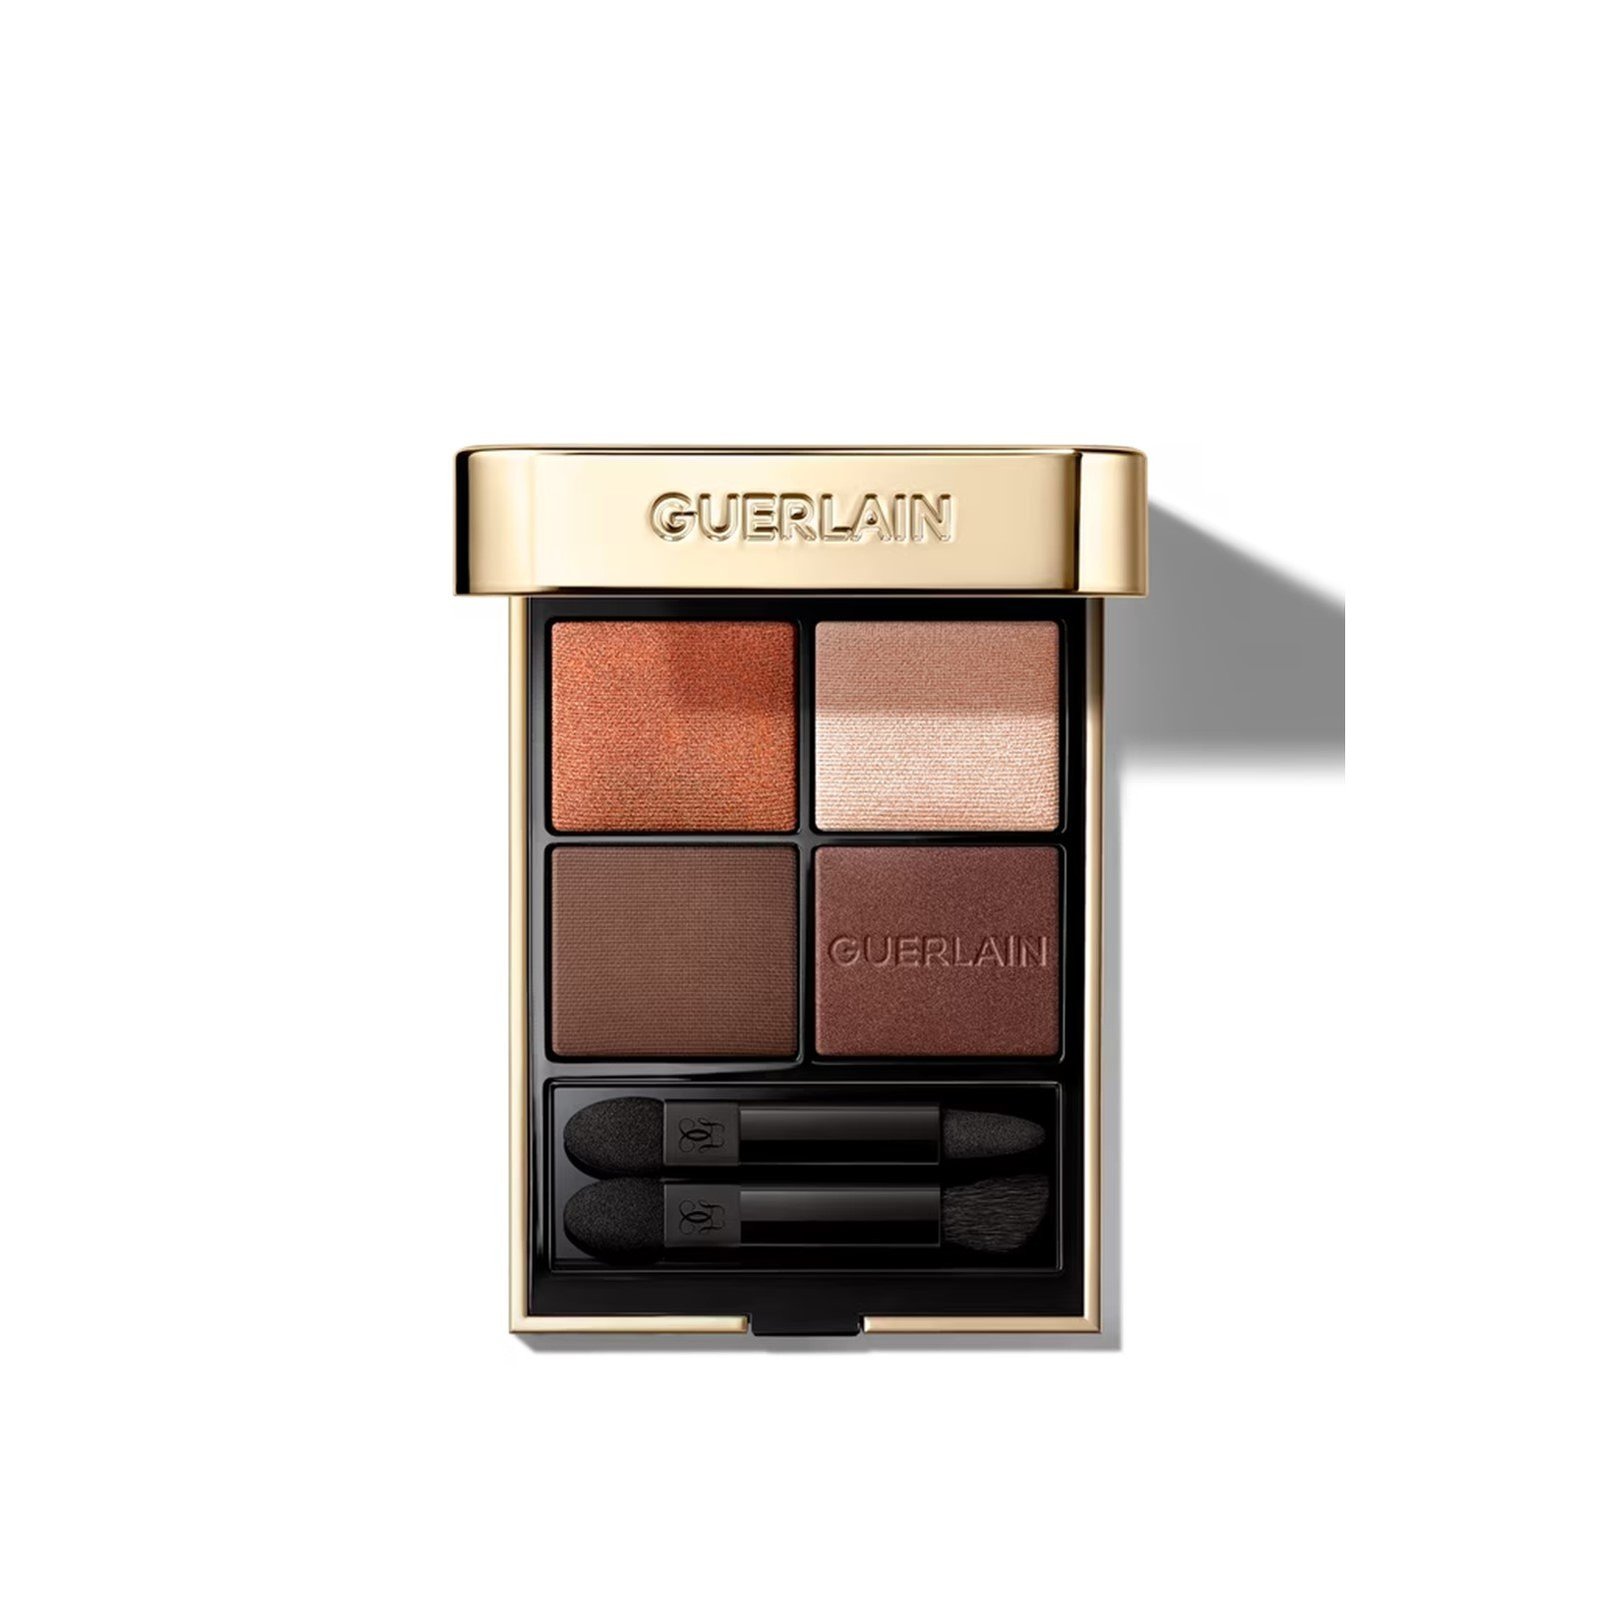 Guerlain Ombres G Multi-Effect Eyeshadow Quad 910 Undressed Brown